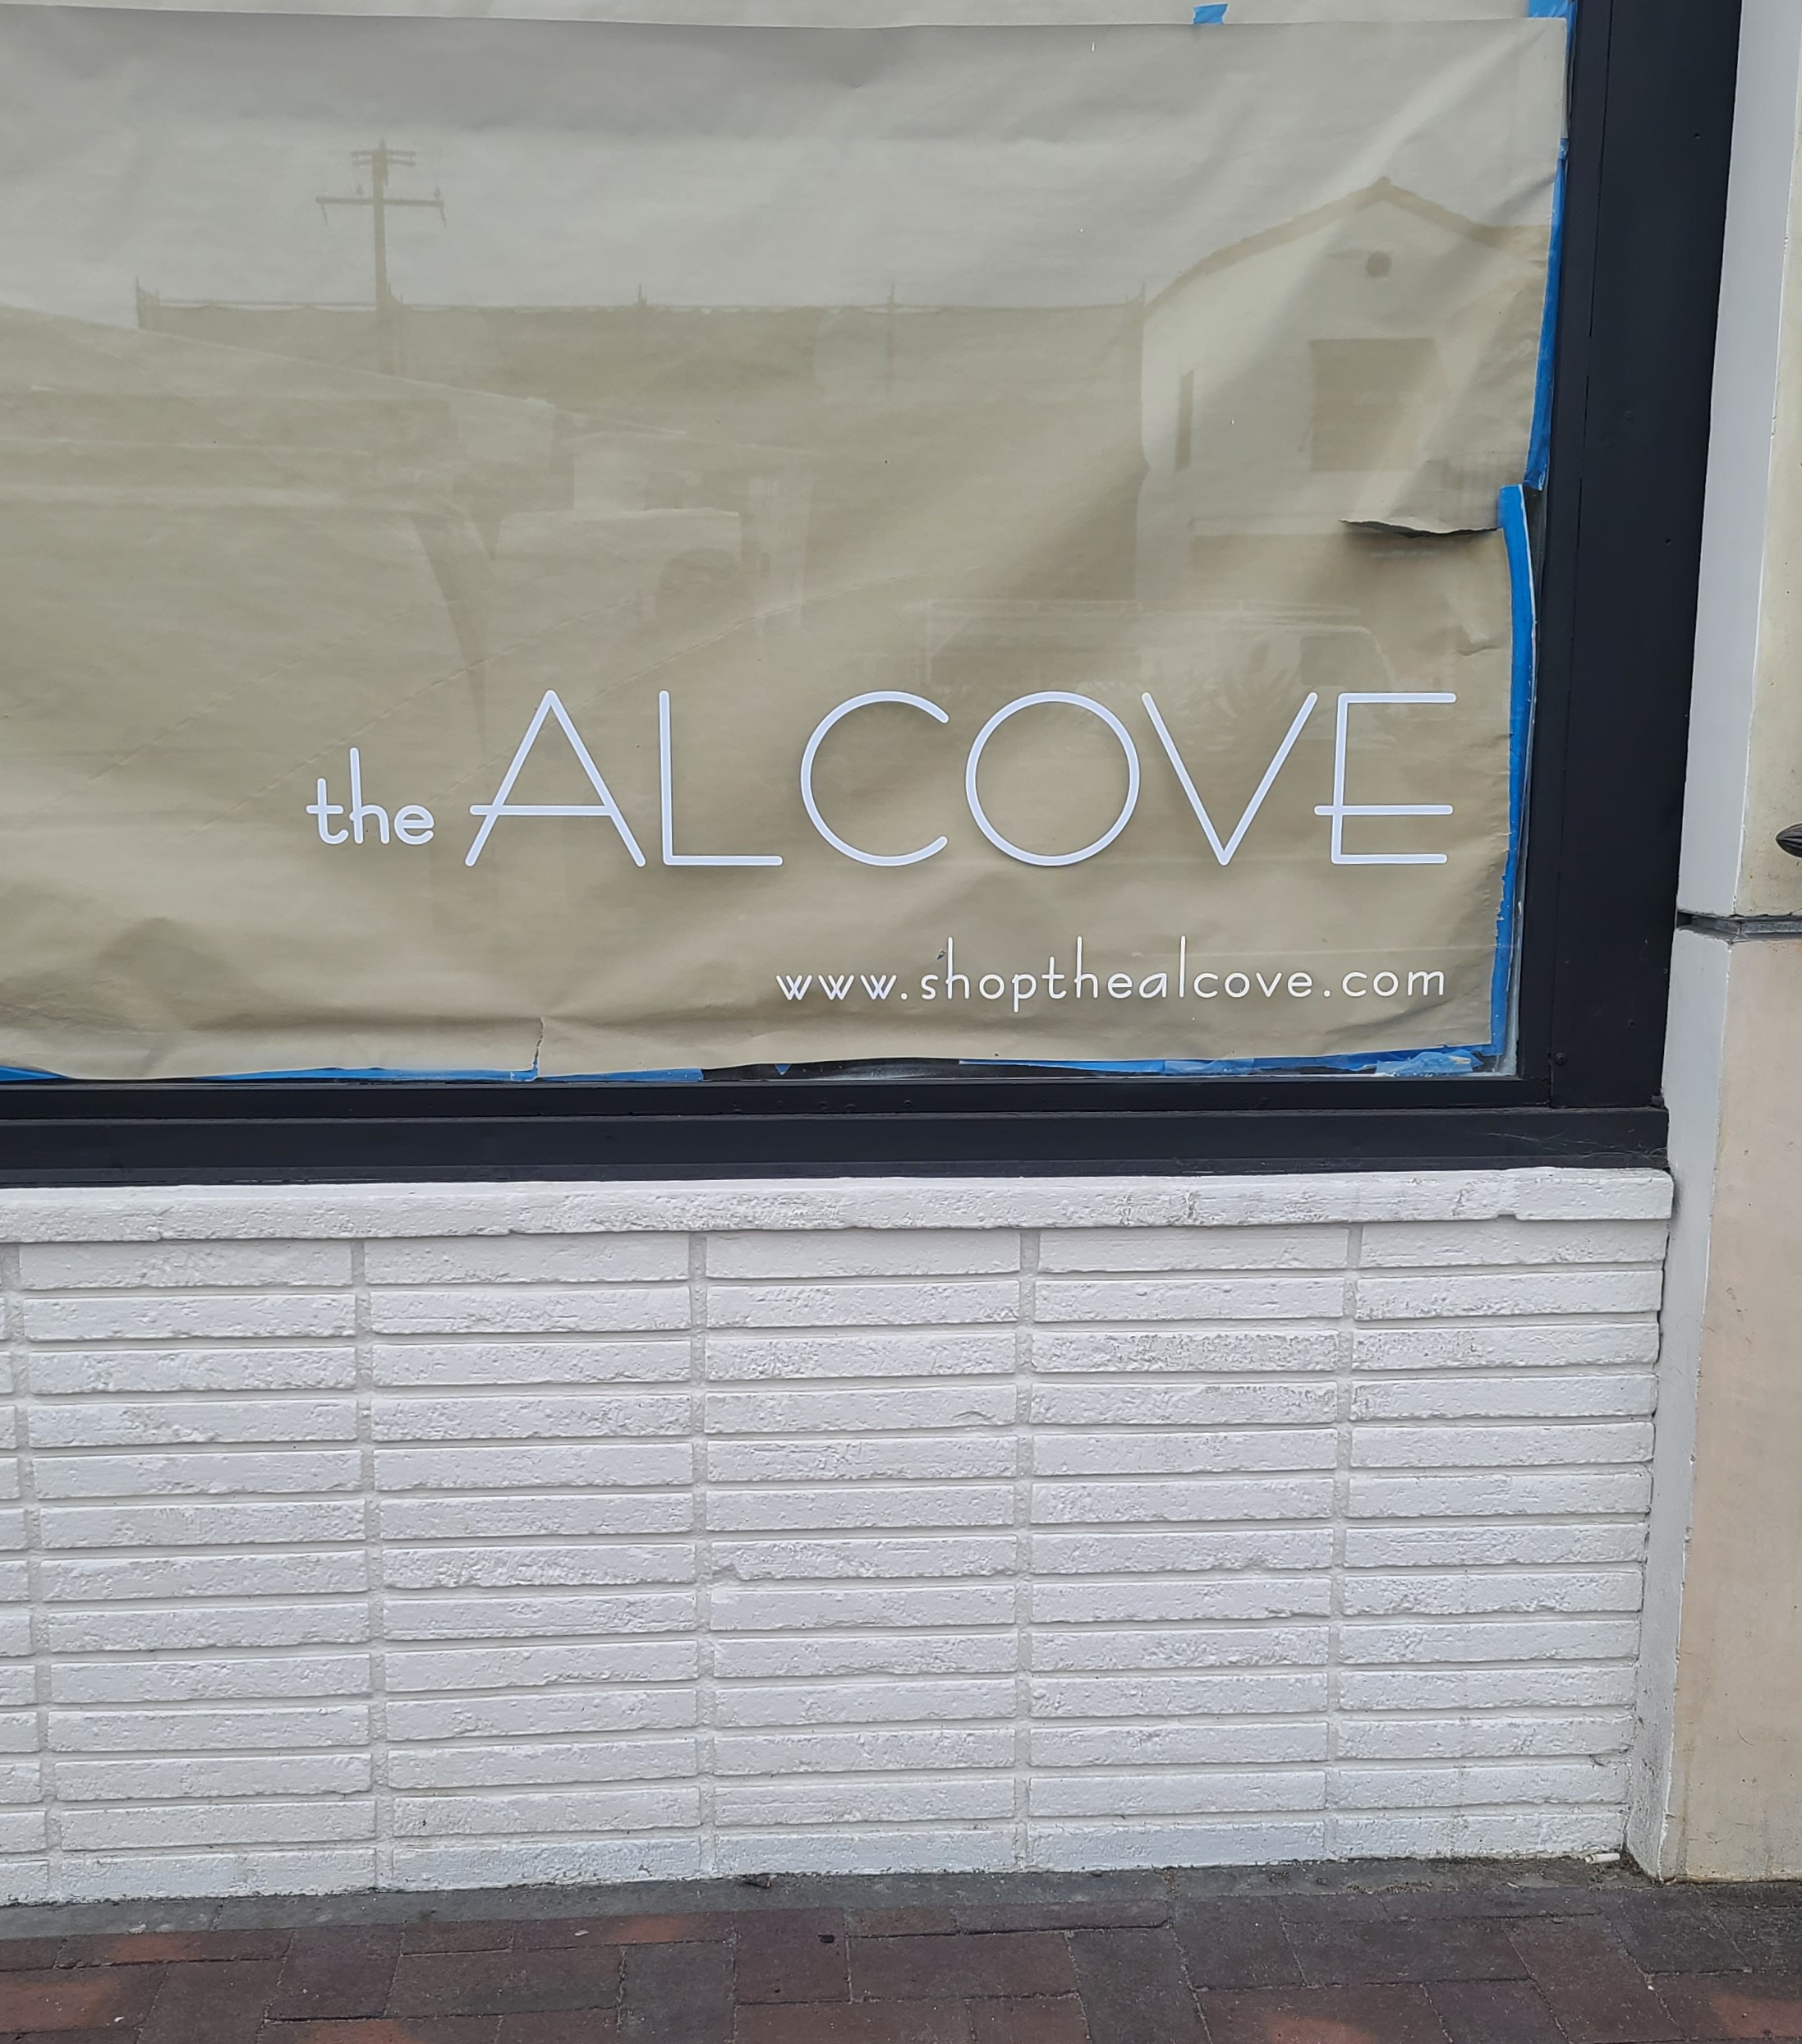 These are the storefront window graphics we fabricated and installed for The Alcove's new branch in Long Beach.